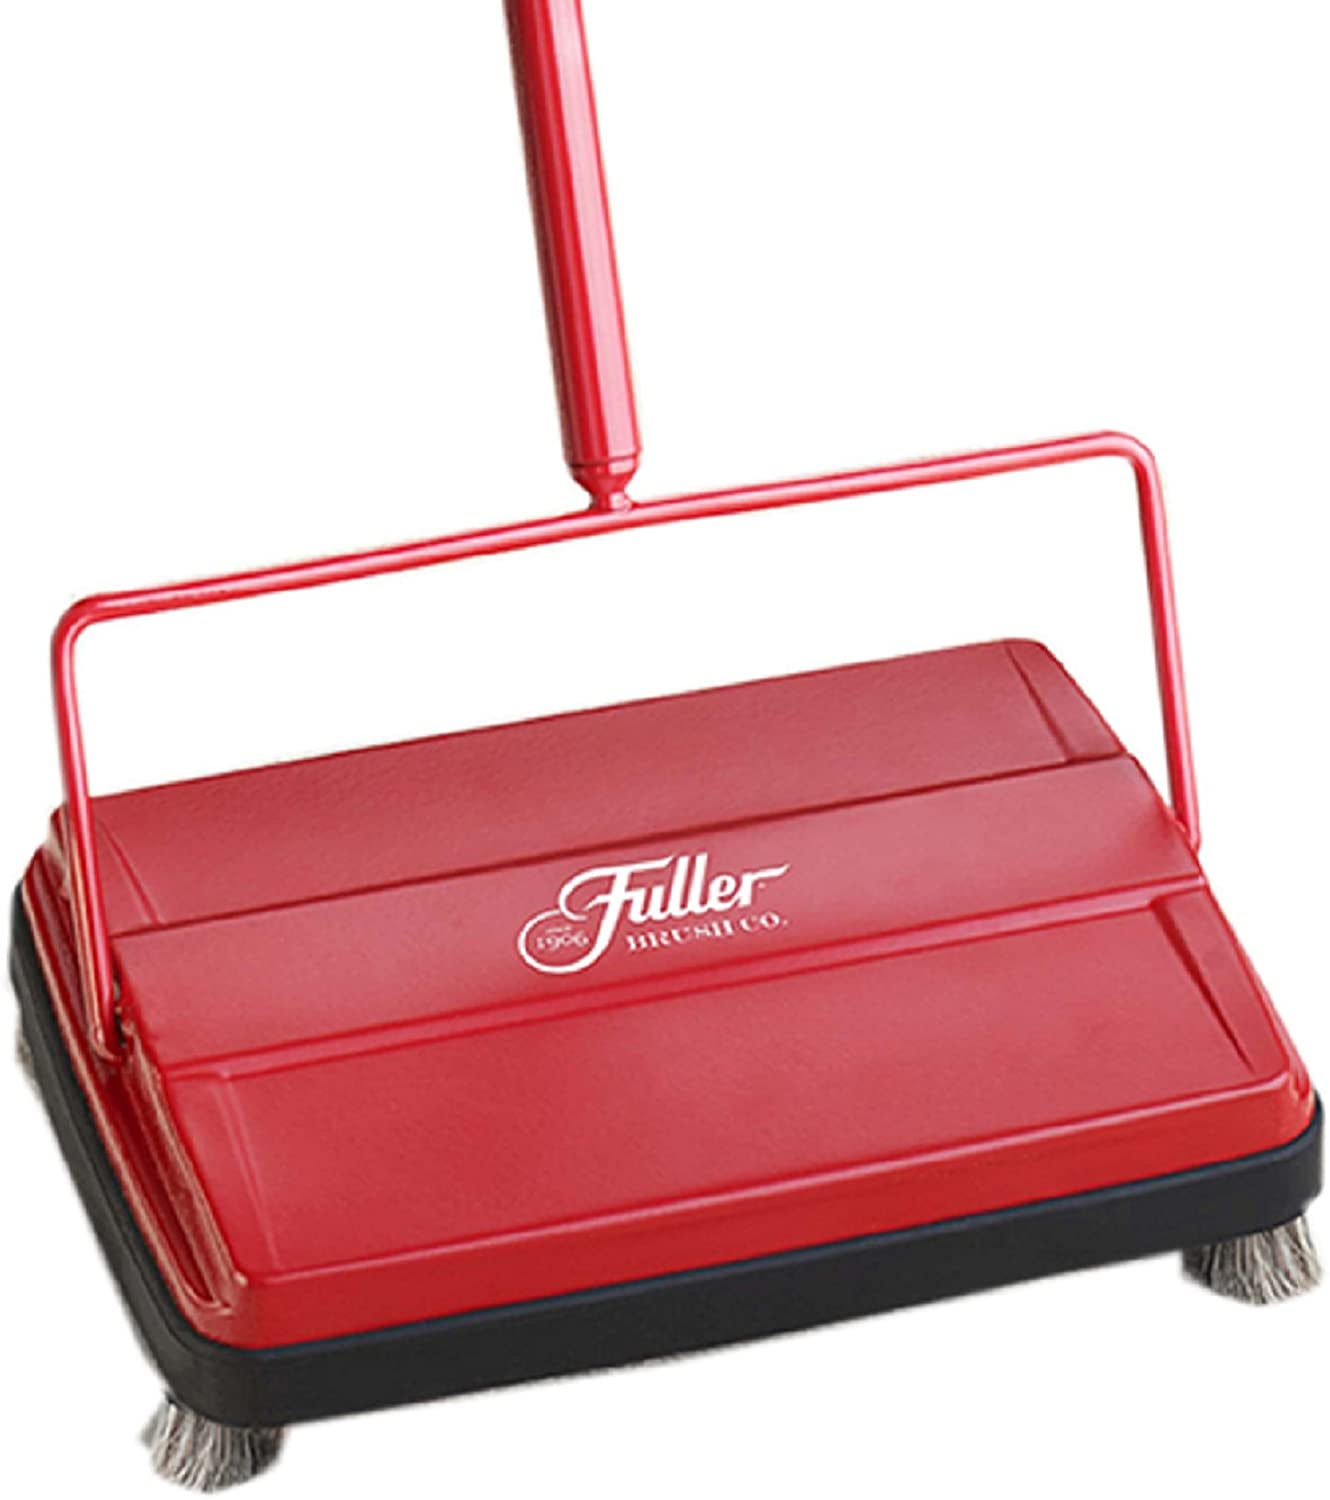 Fuller Brush 17028 Electrostatic Carpet & Floor Sweeper - 9" Cleaning Path - Lightweight - Ideal for Crumby Messes - Works On Carpets & Hard Floor Surfaces - Bright White - image 1 of 6